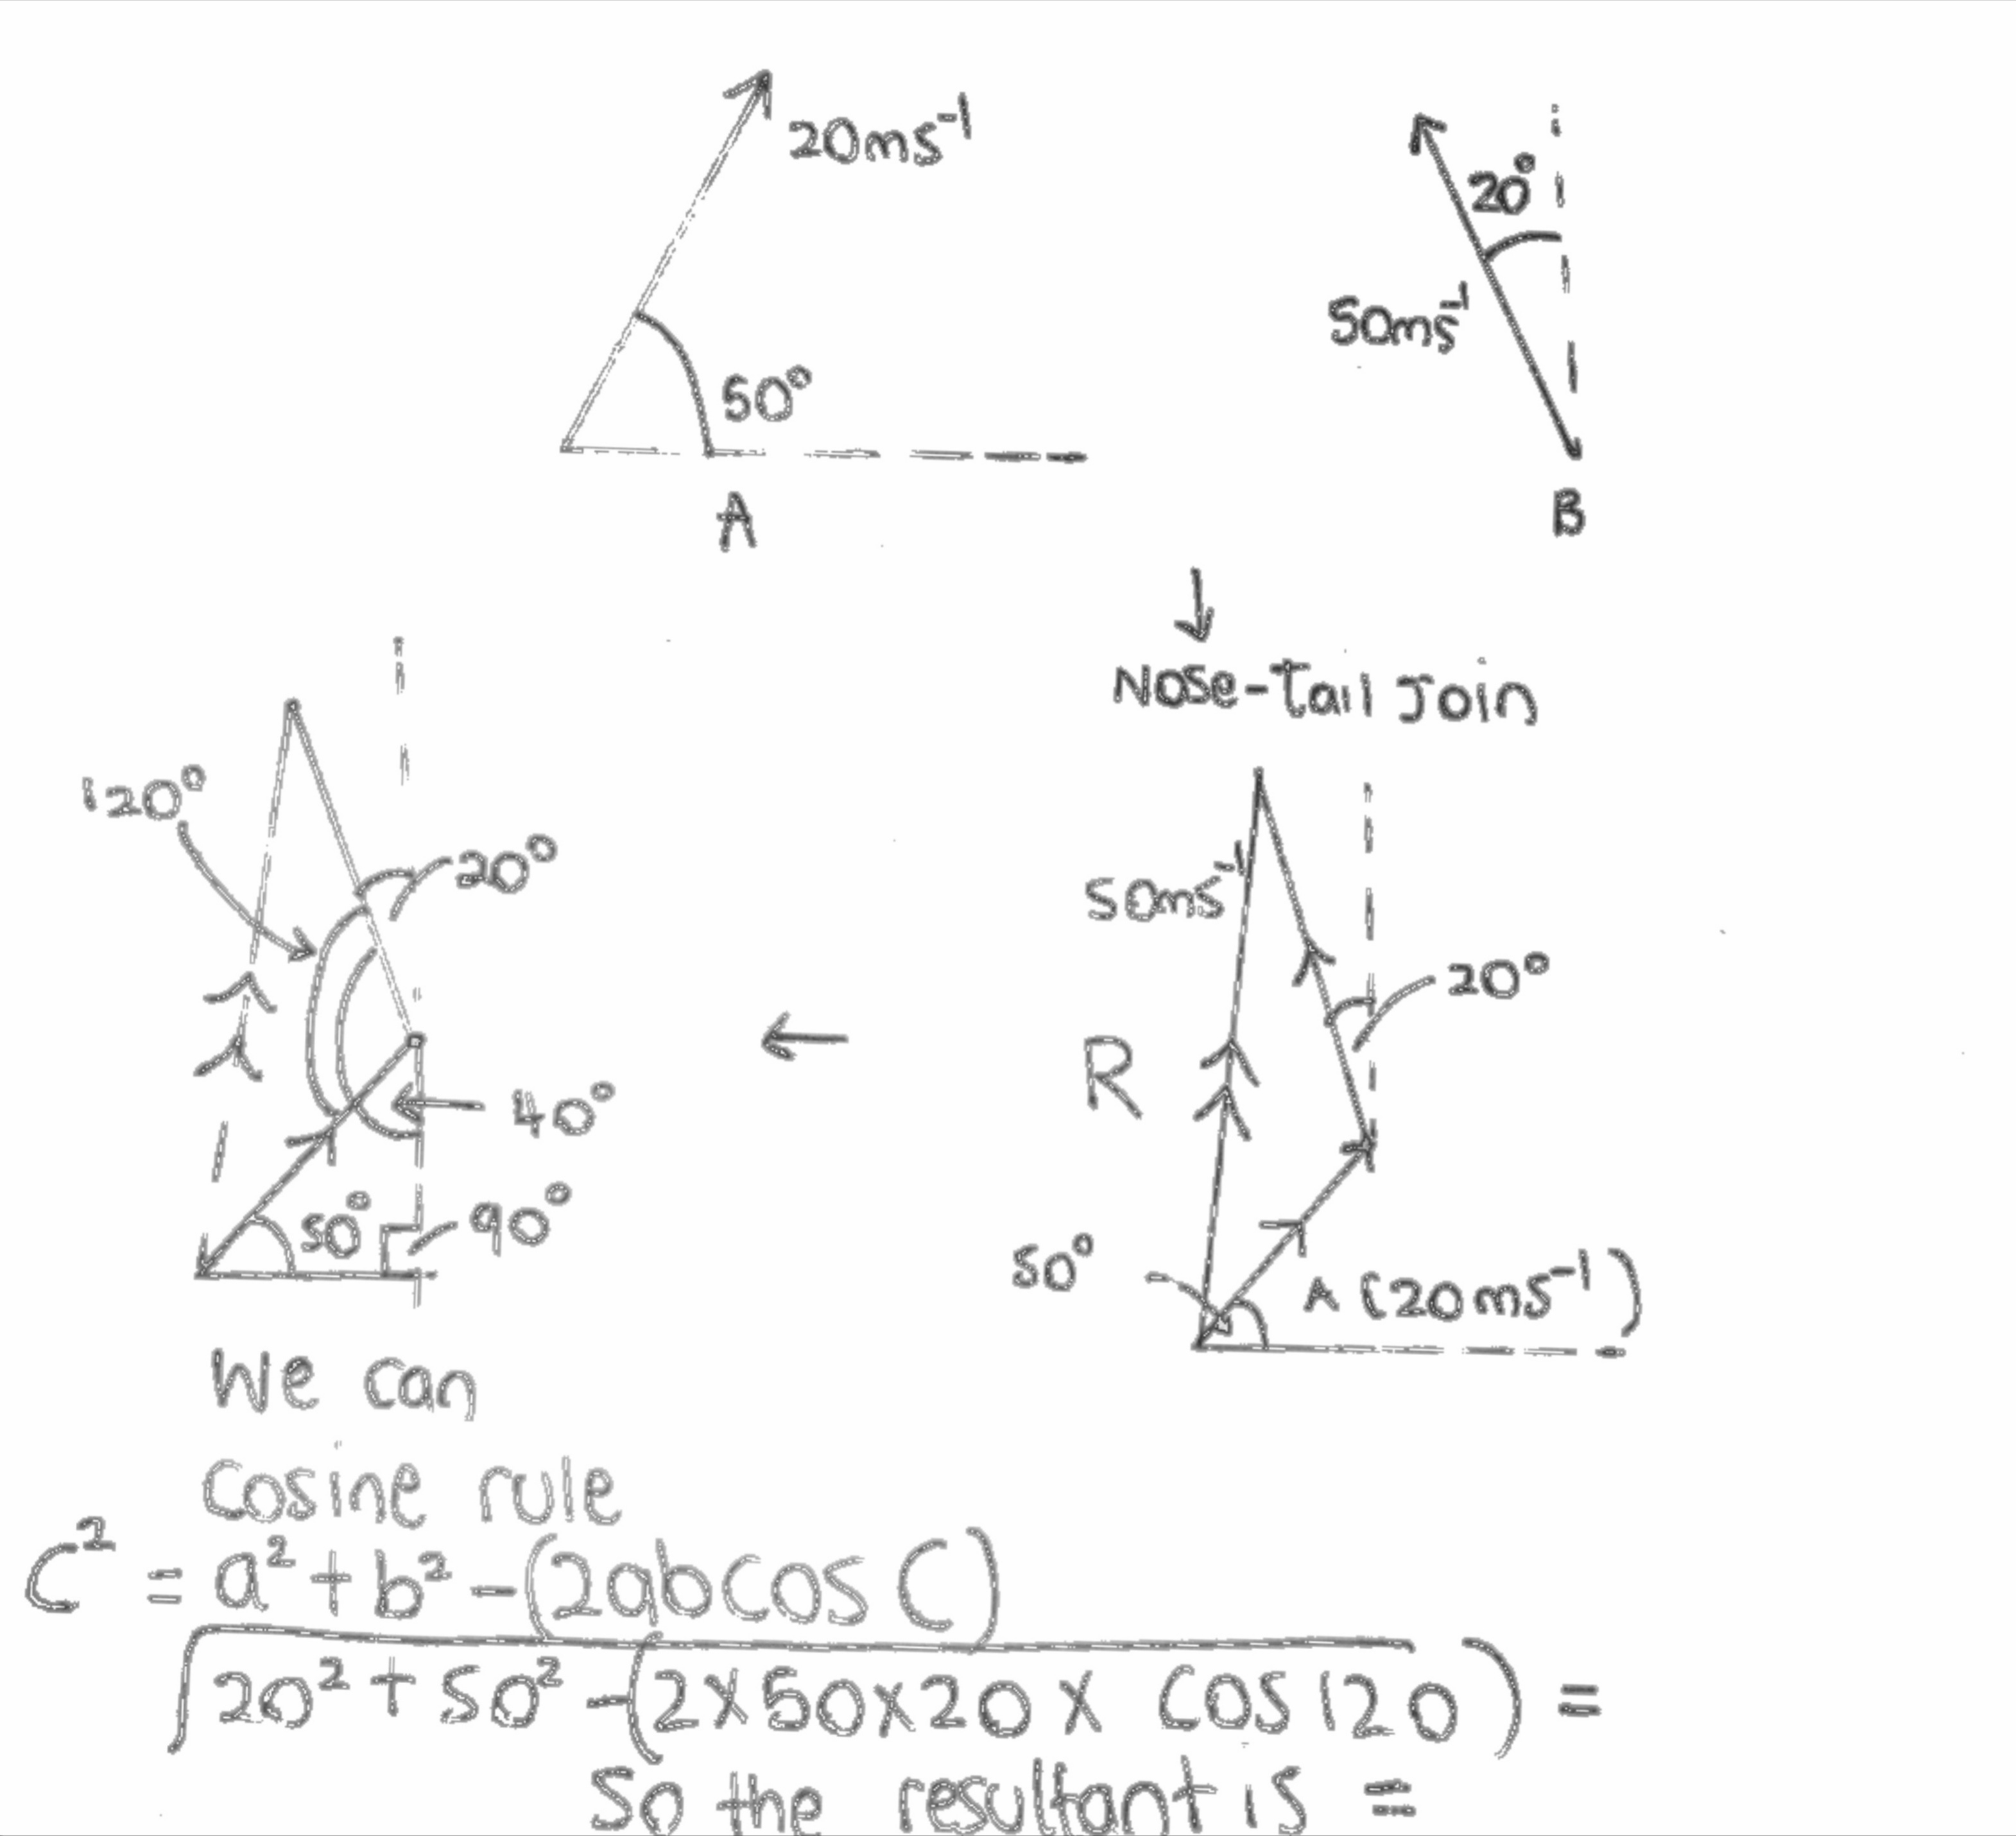 Cambridge alevel physics revision notes - this diagram shows cosine and sin rules